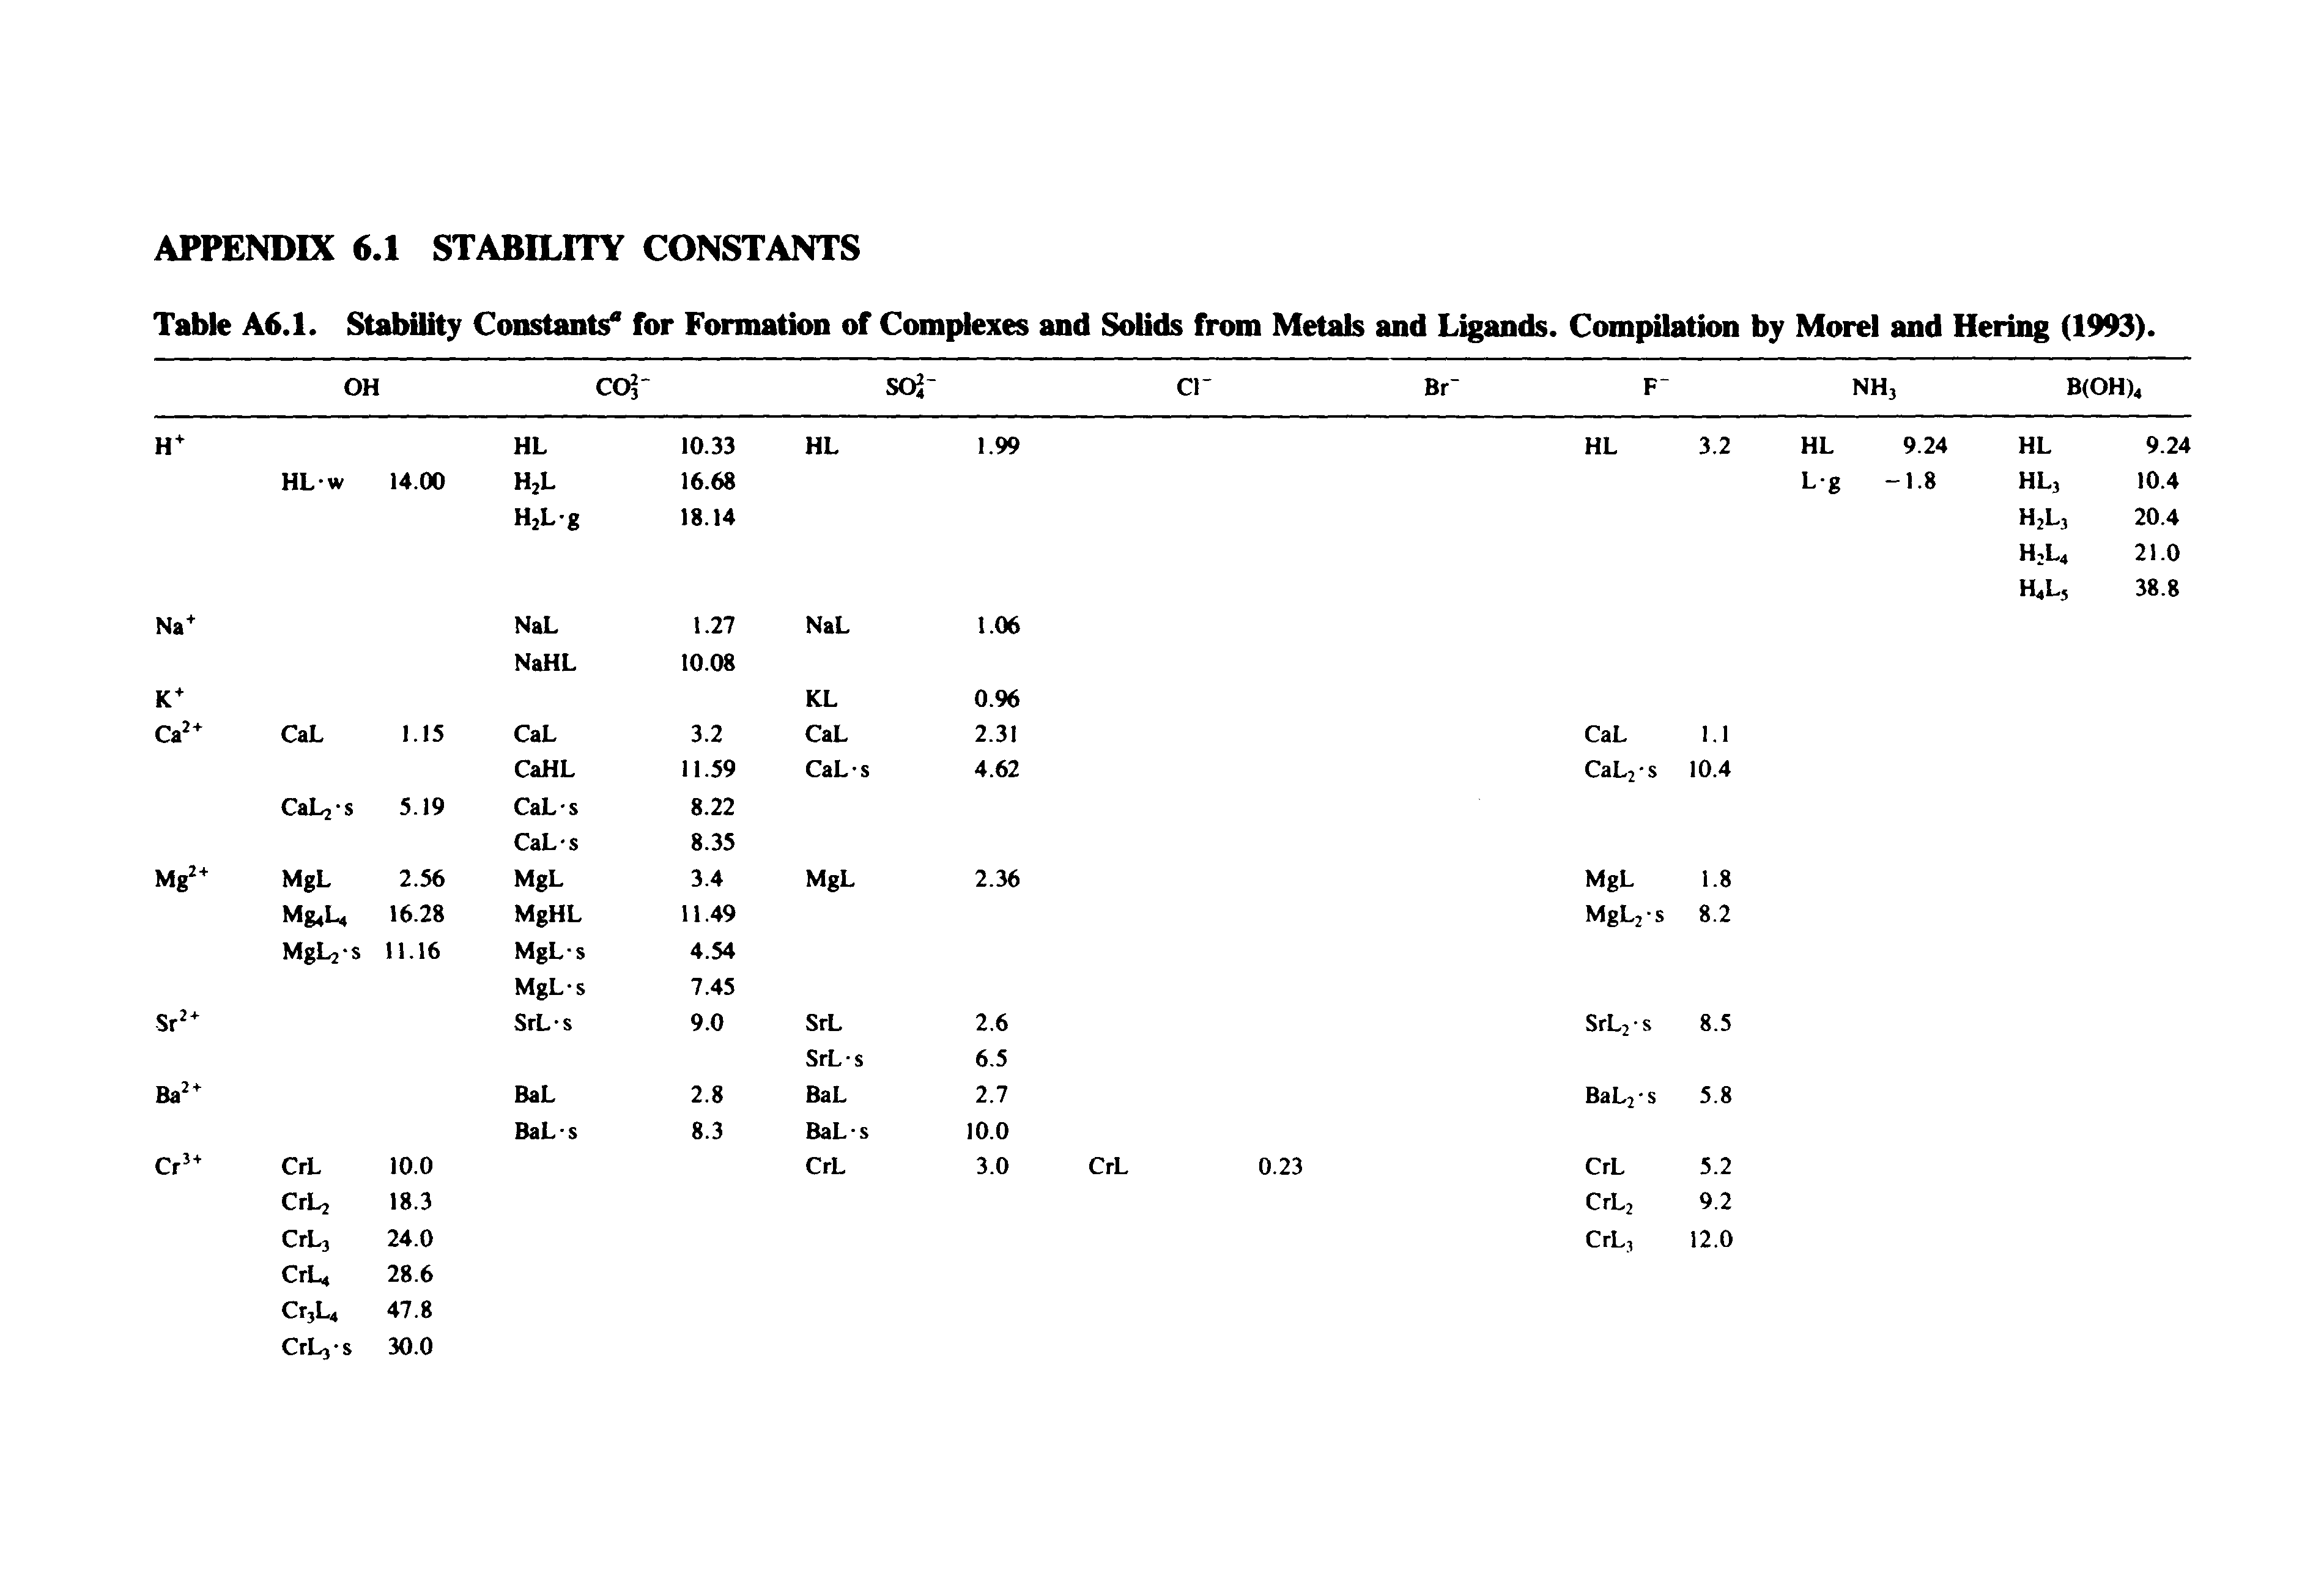 Table A6.1. Stability Constants" for Formation of Complexes and Solids from Metals and Ligands. Compilation by Morel and Hering (1993).